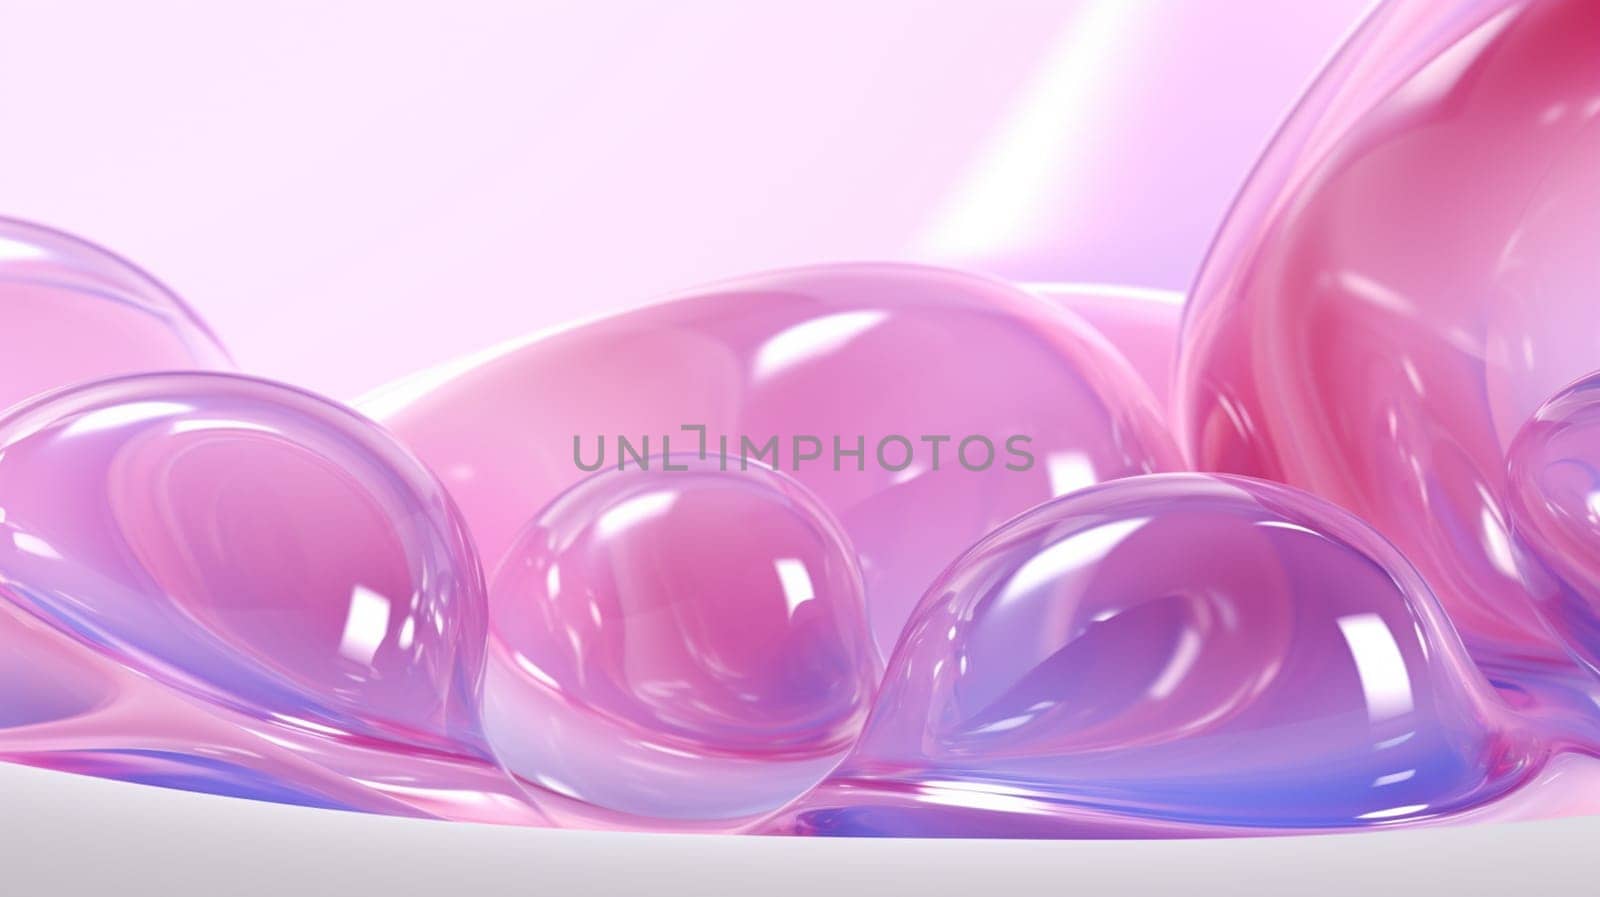 Beautiful abstract close up color pink white and purple soap bubbles background and wallpaper by Andelov13